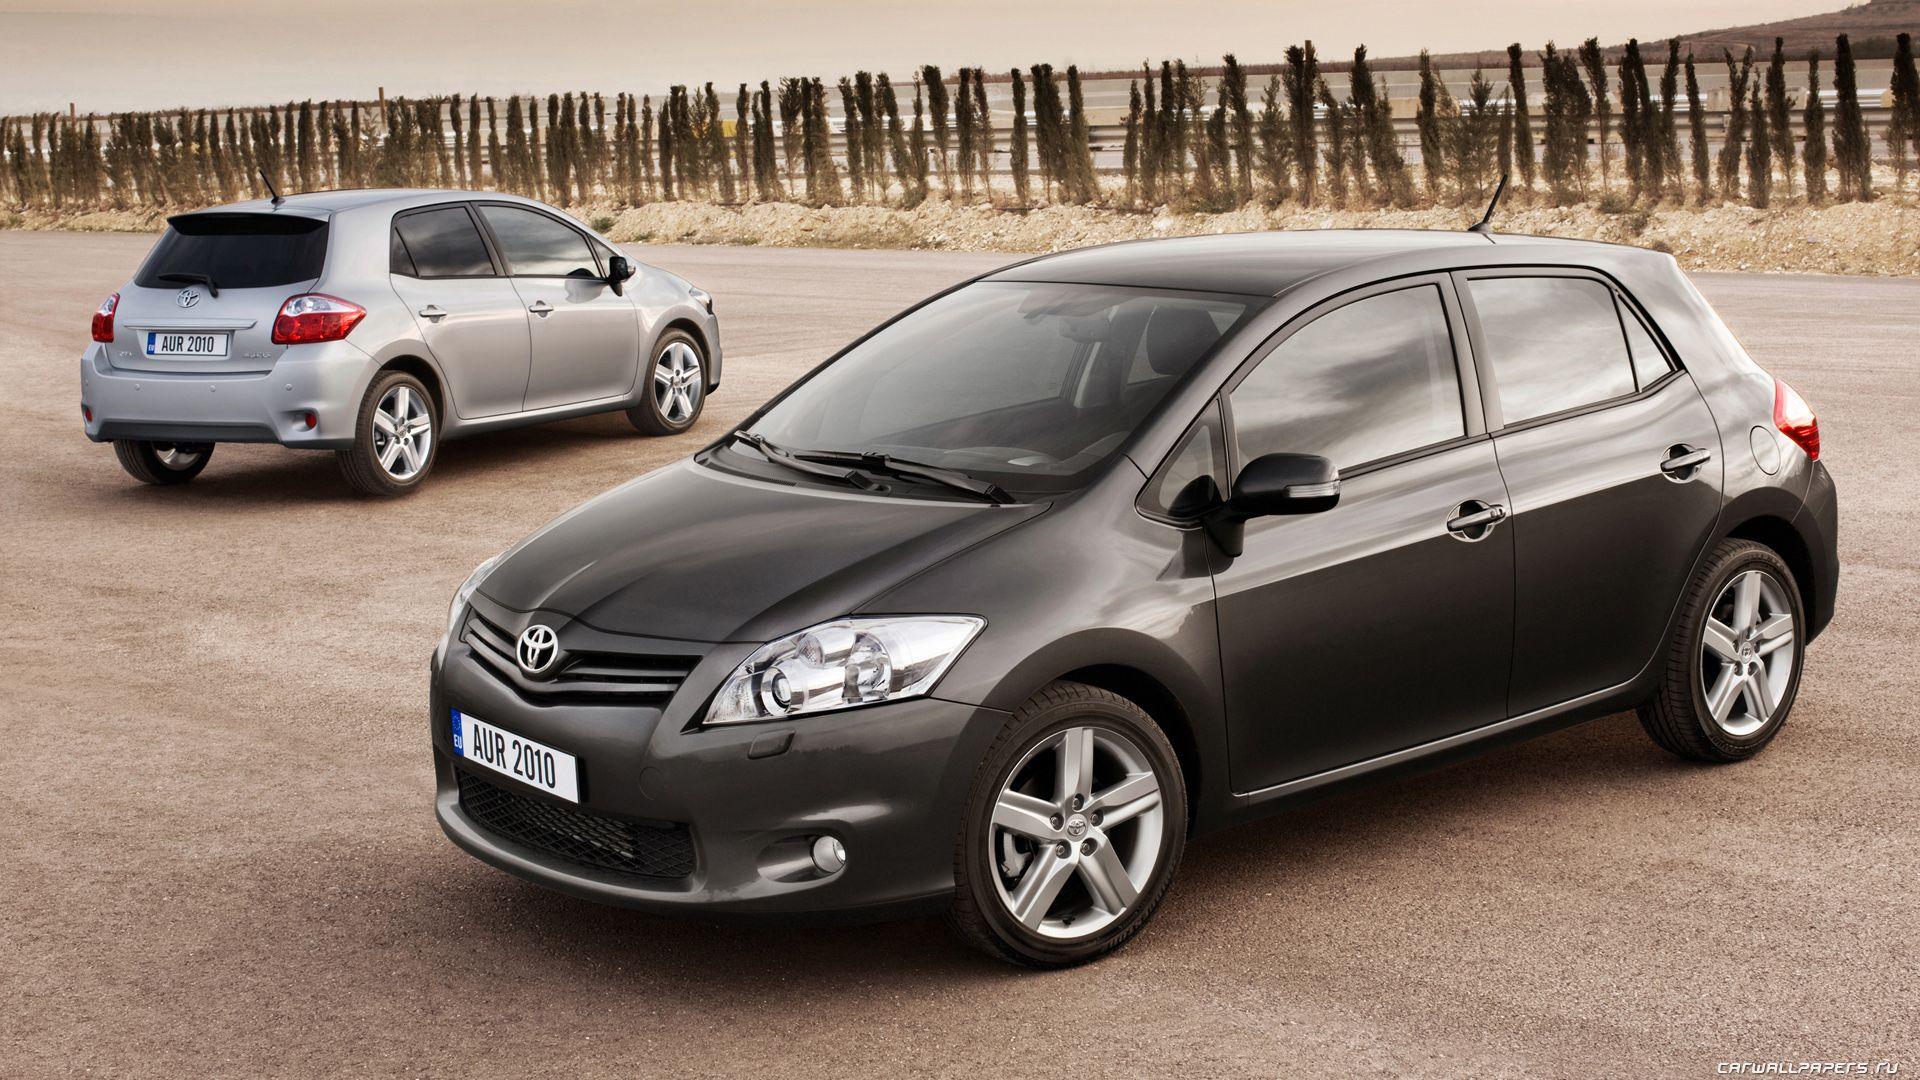 Toyota Auris Wallpapers